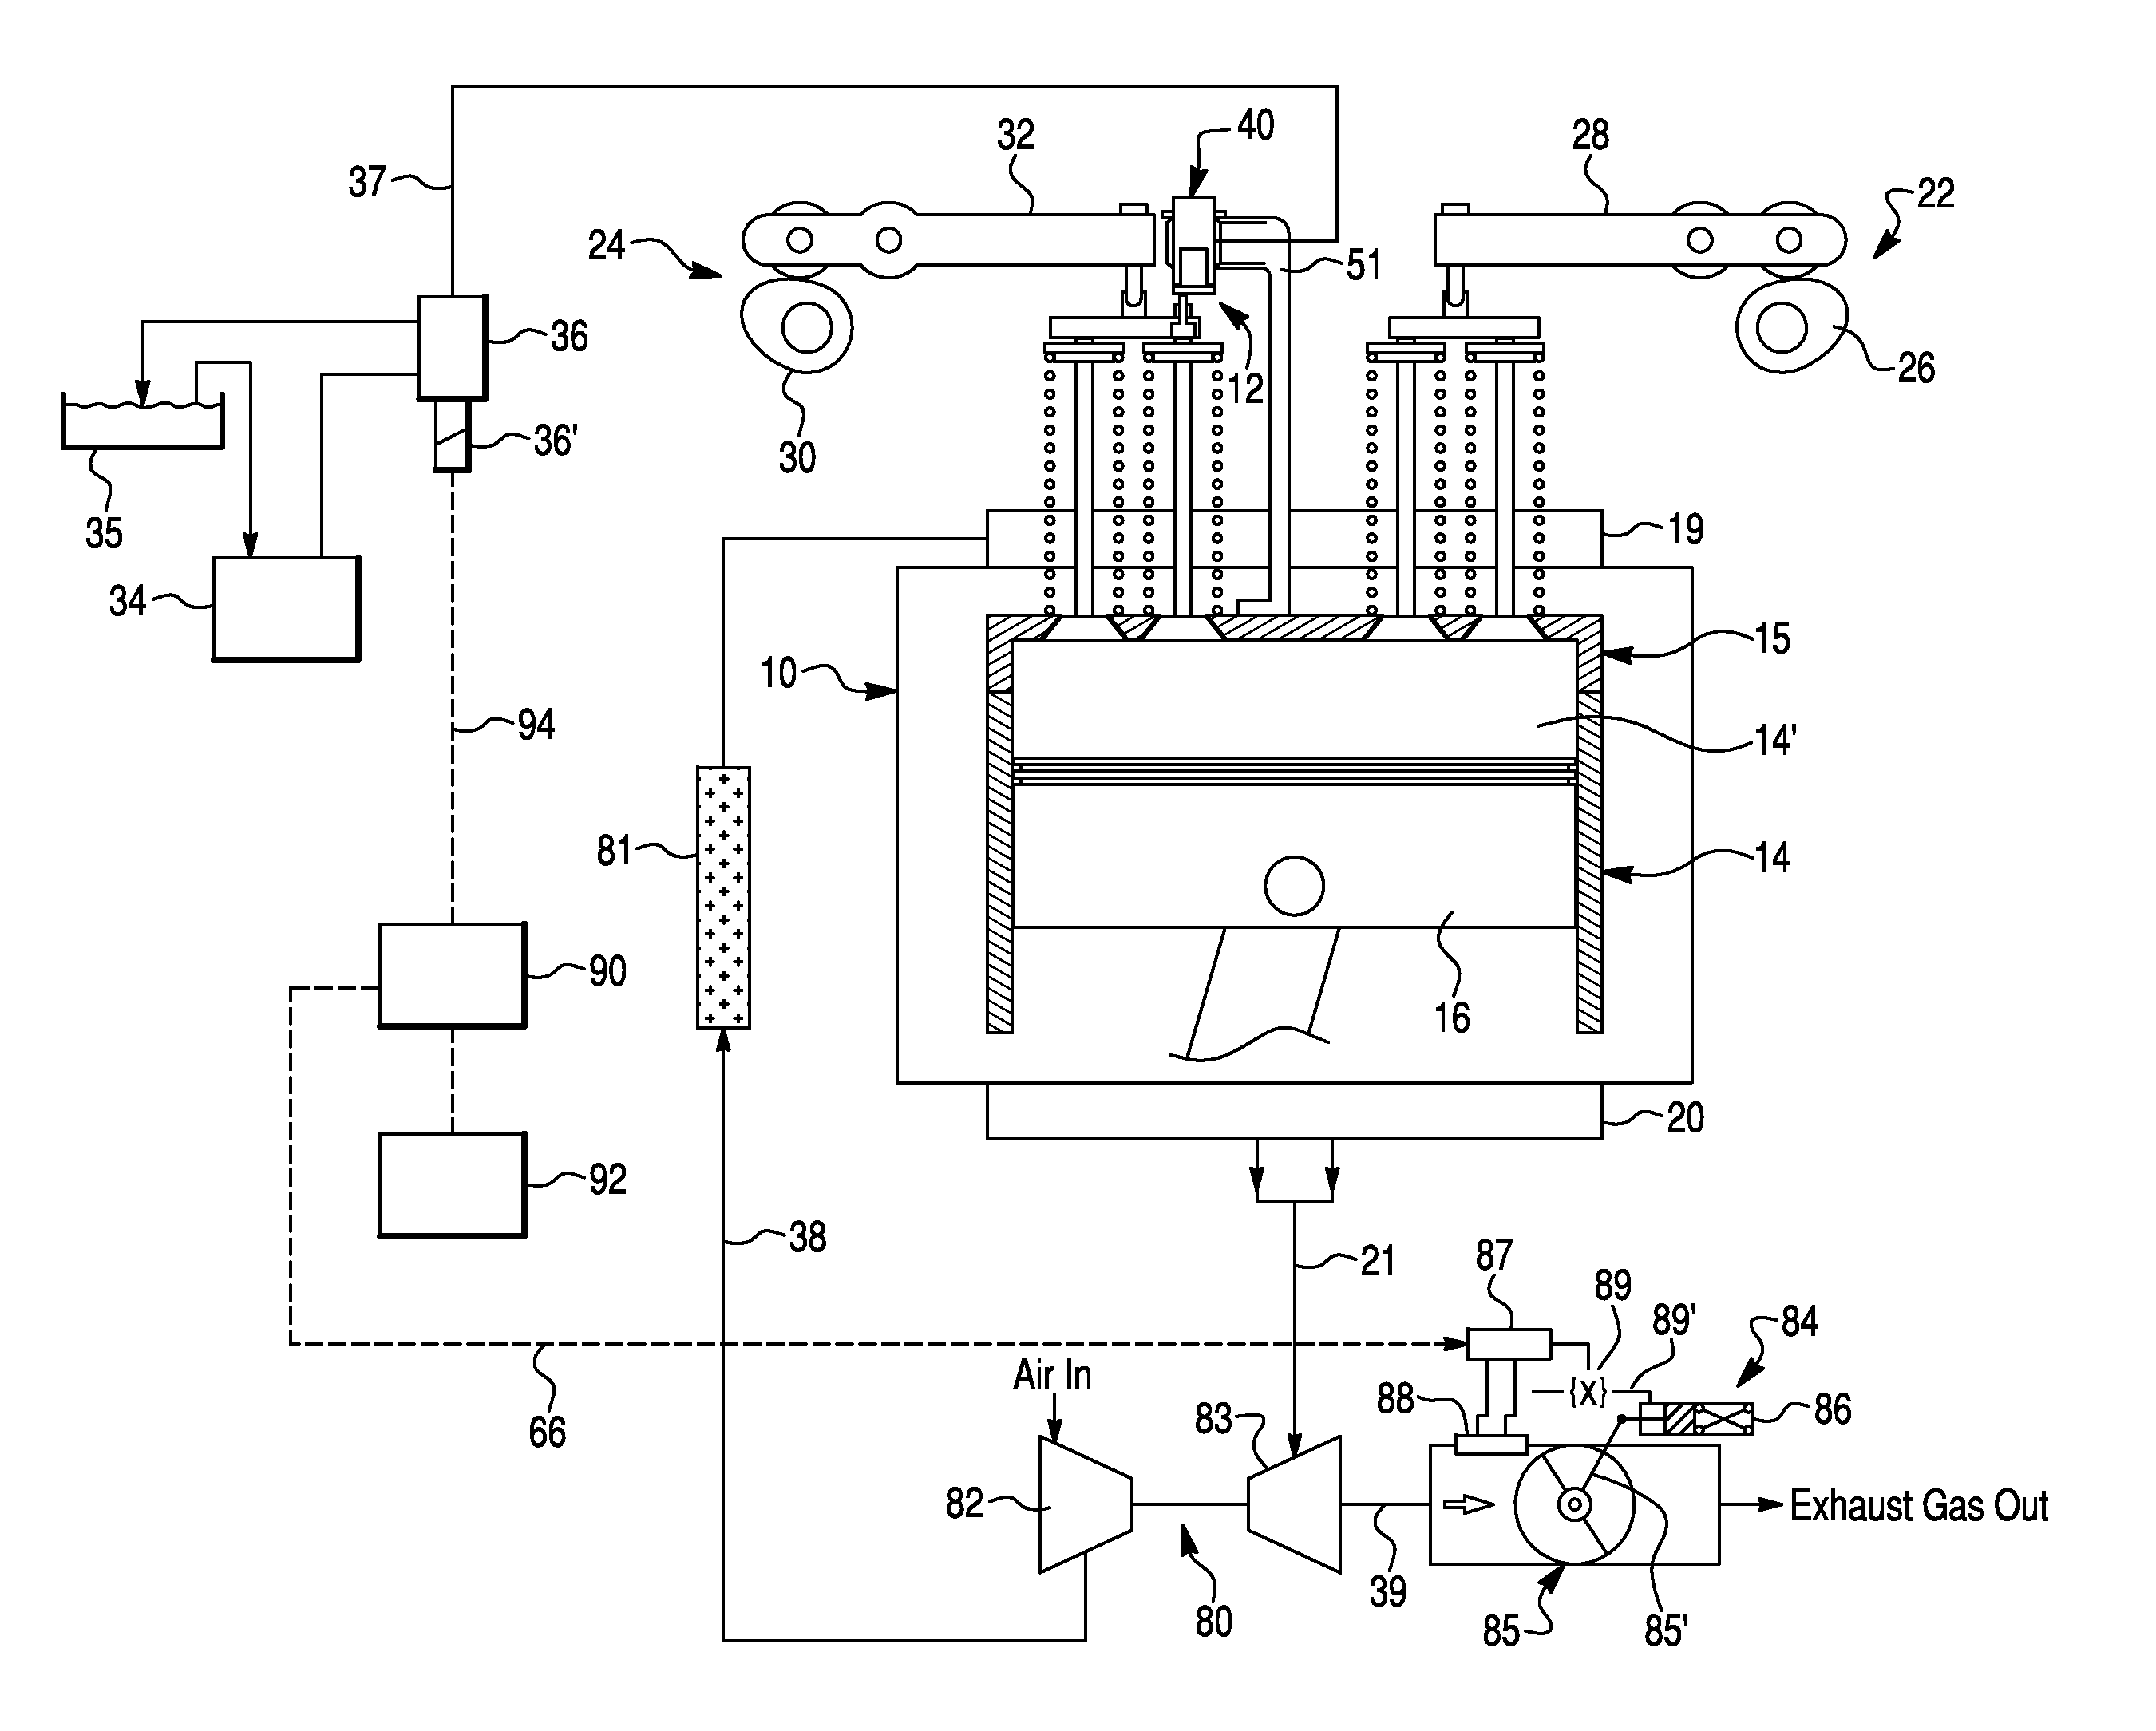 Self-contained compression brakecontrol module for compression-release brakesystem of internal combustion engine